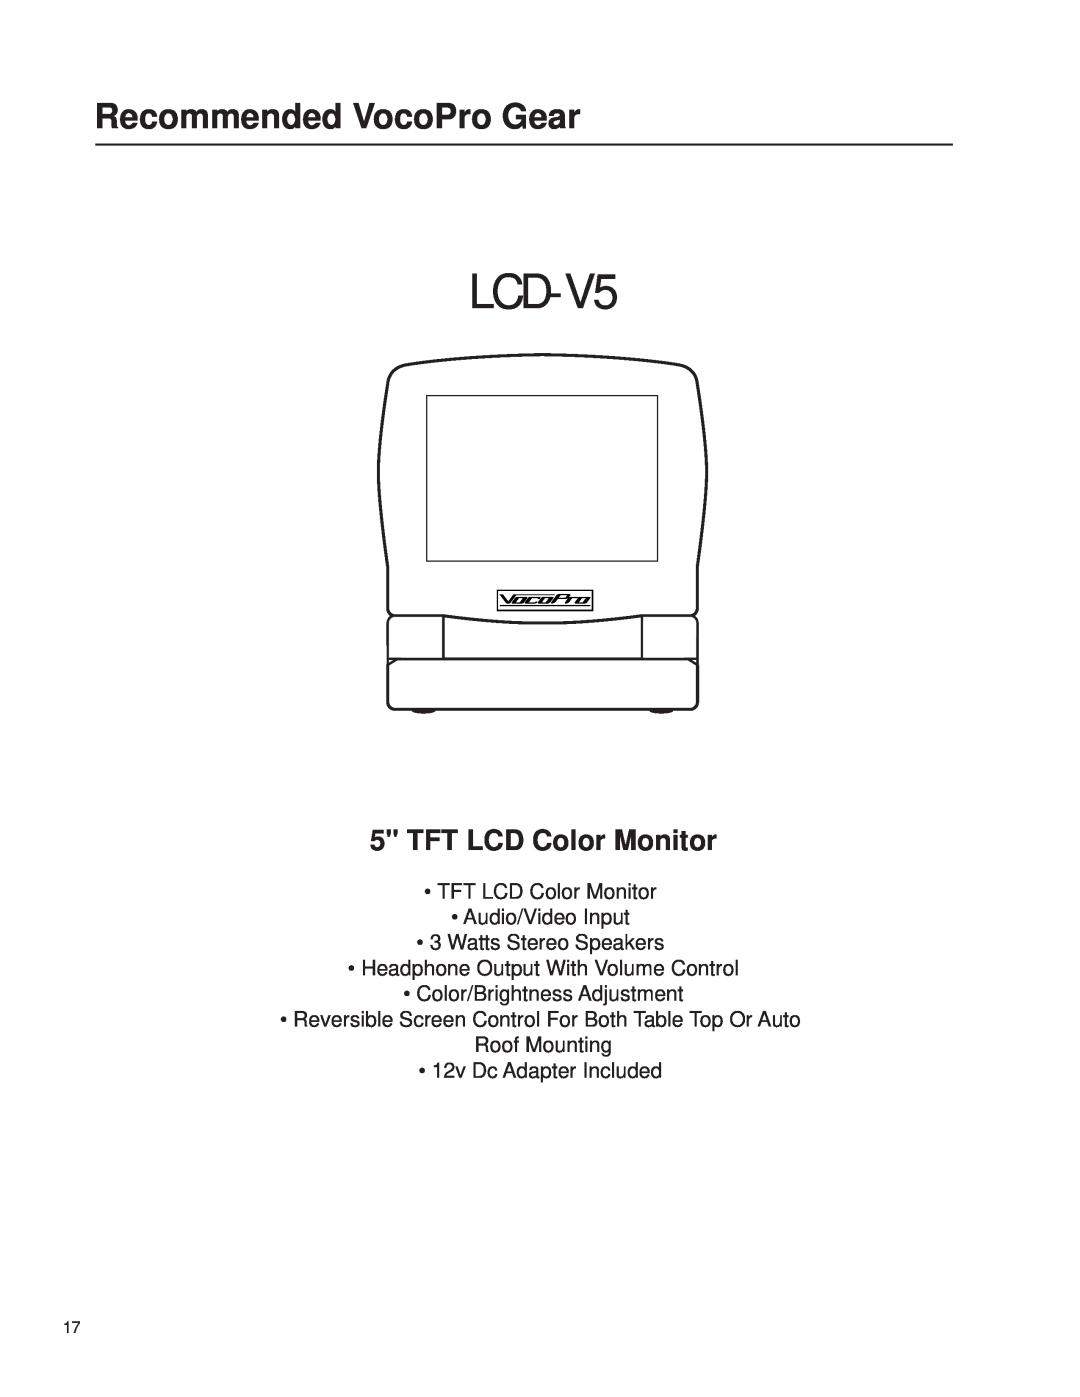 VocoPro Cassette Deck owner manual LCD-V5, TFT LCD Color Monitor, Recommended VocoPro Gear 